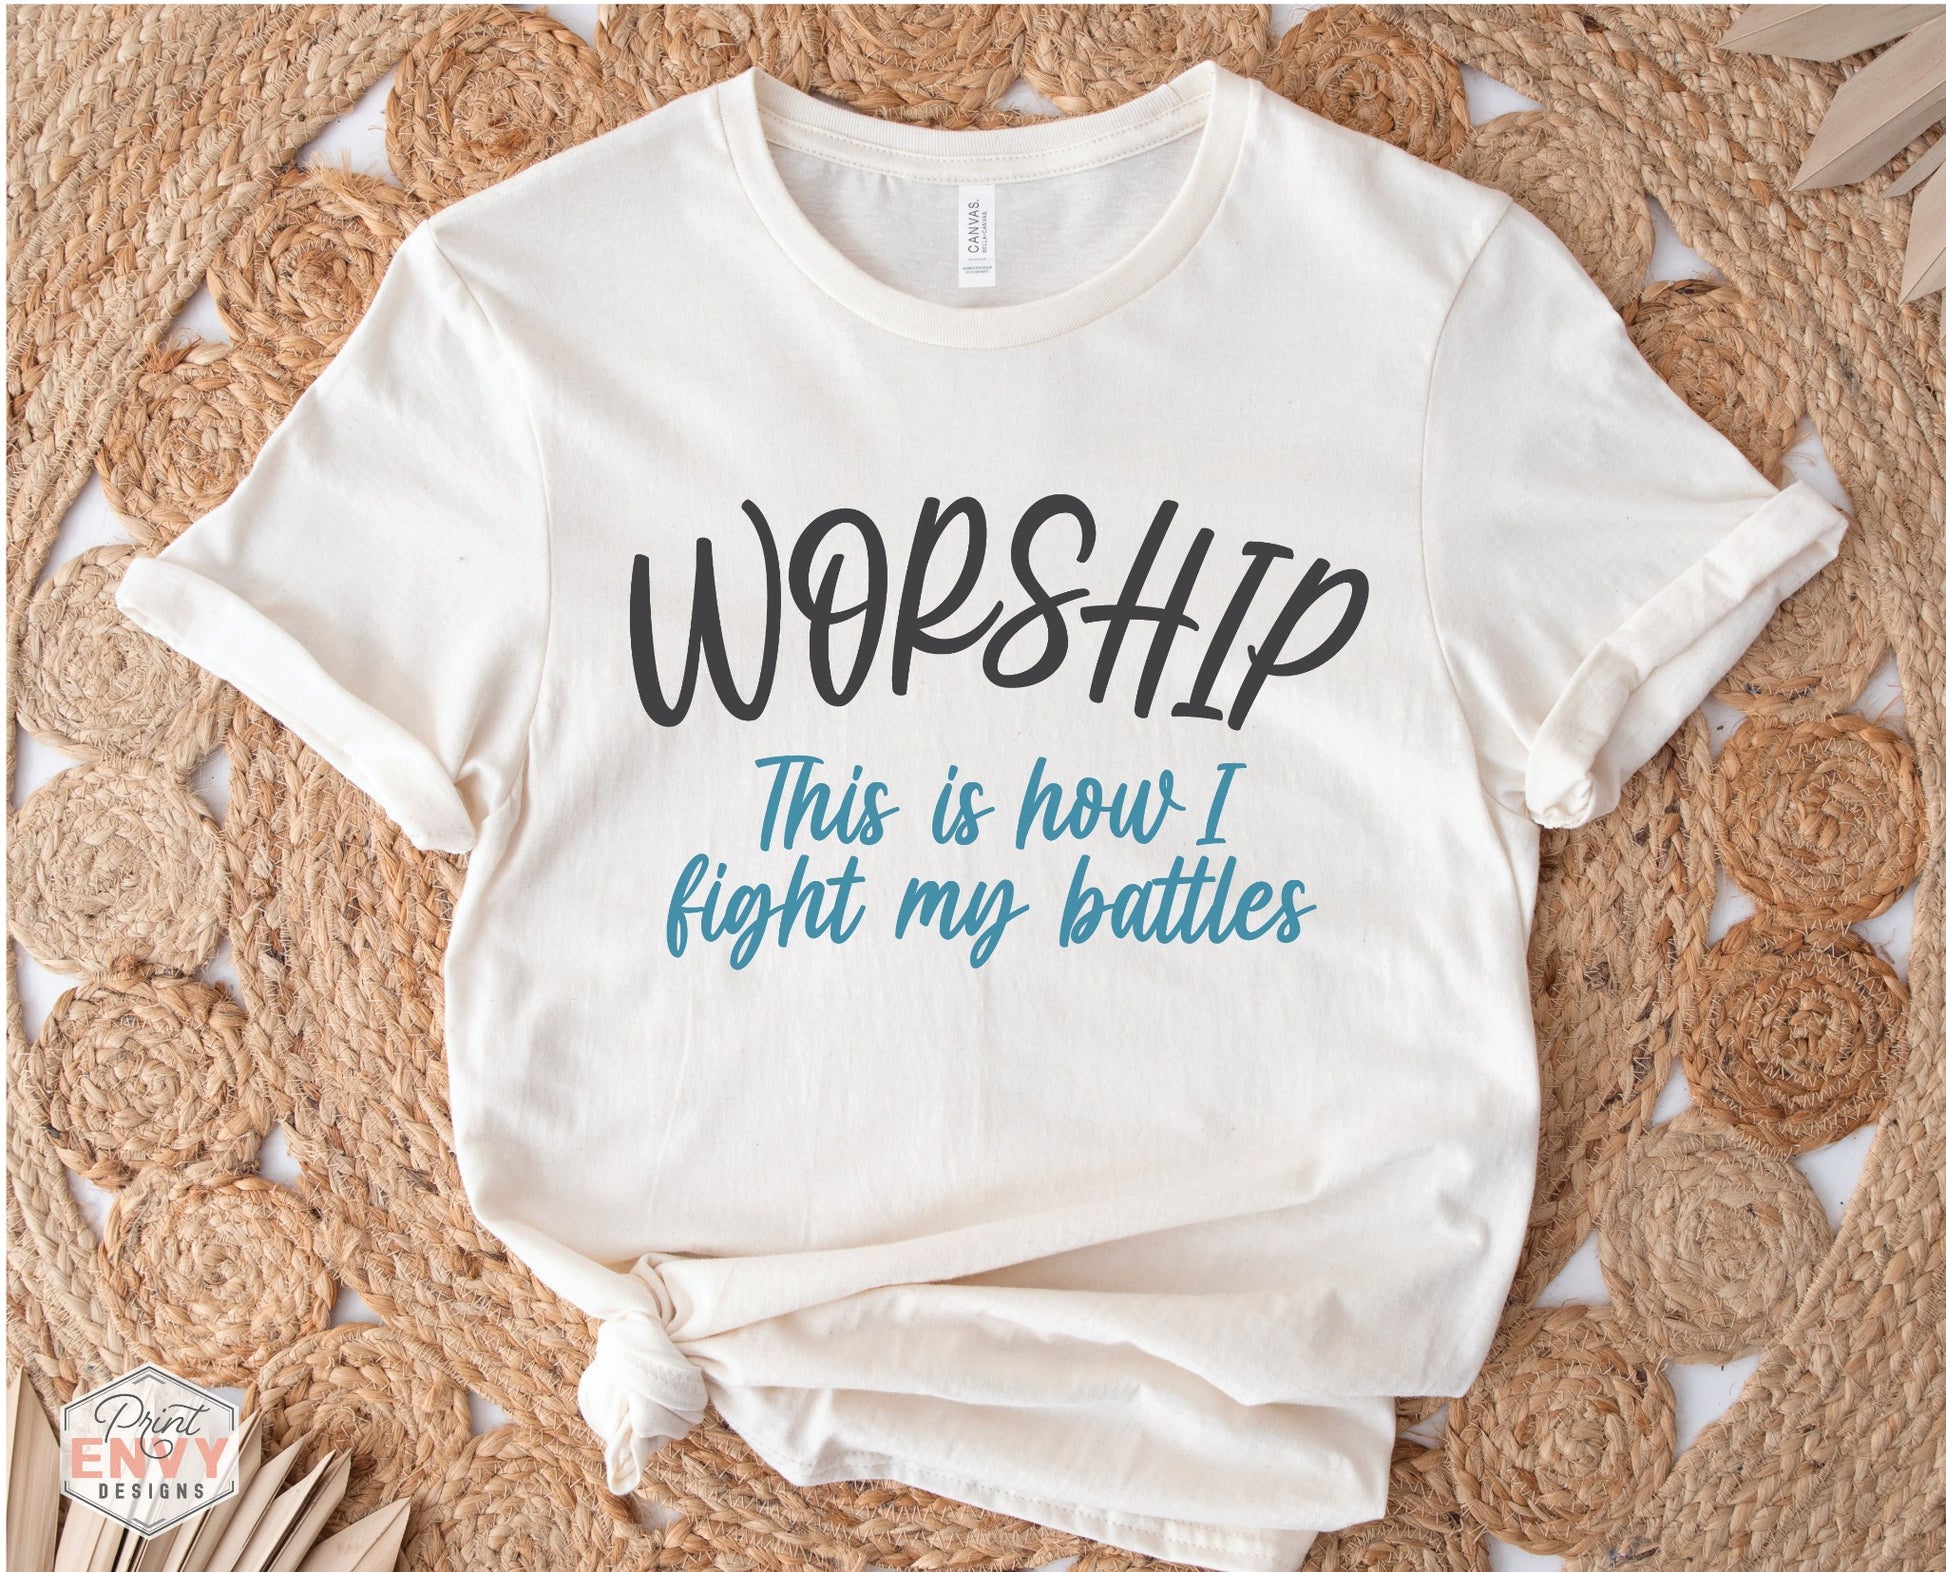 Worship This Is How I Fight My Battles Christian aesthetic t-shirt design printed on soft cream tee for women, great gift for worship leaders